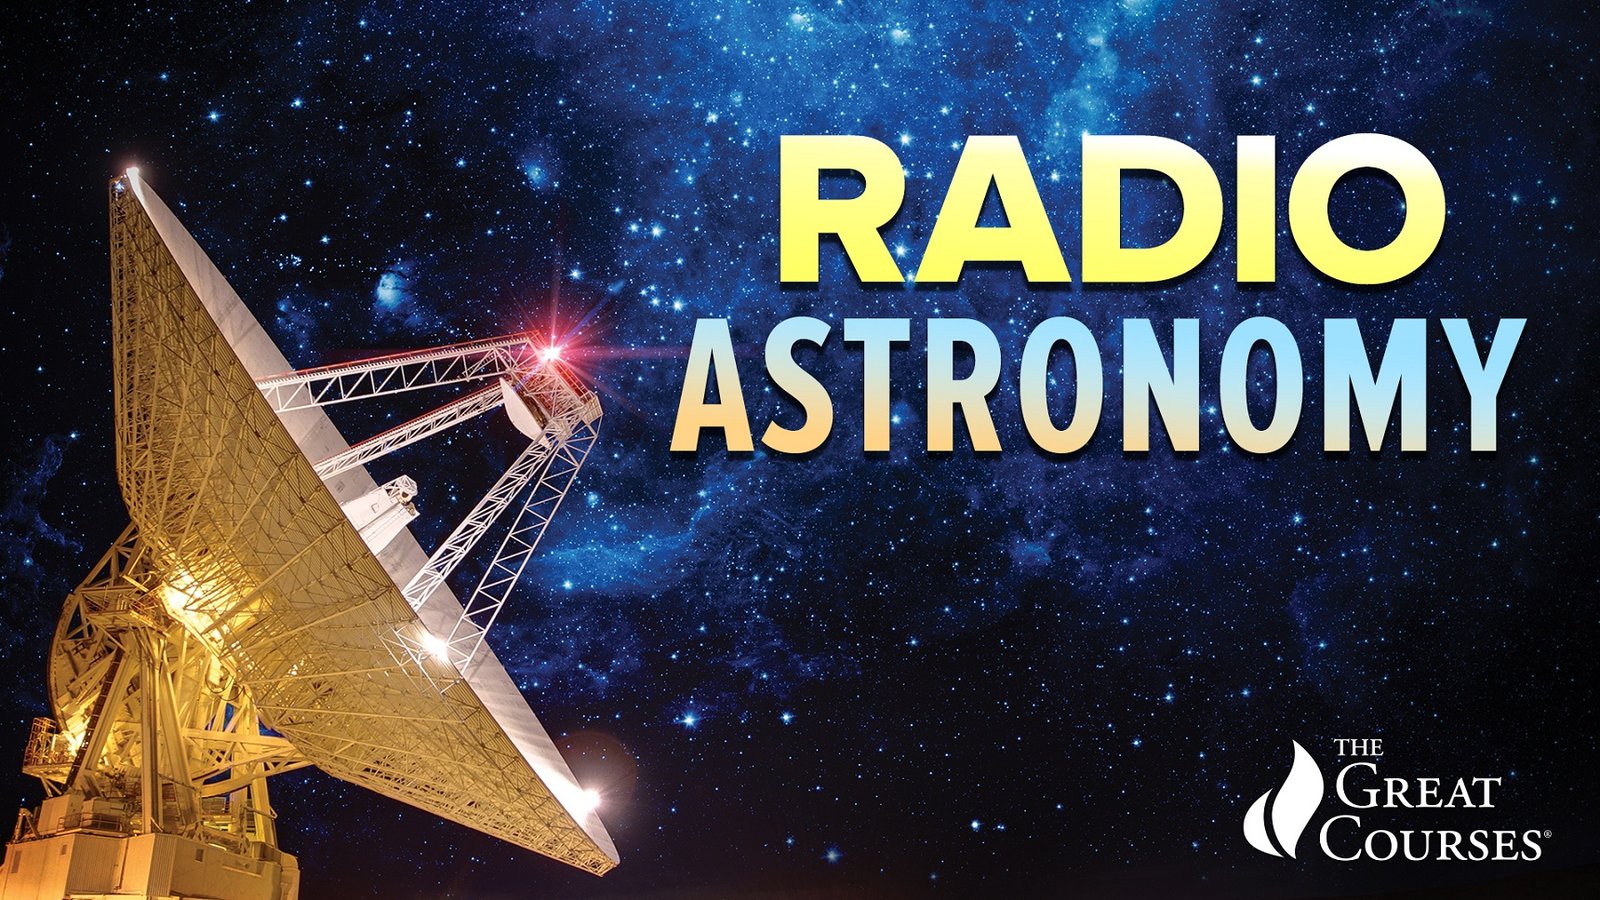 Radio Astronomy - Observing the Invisible Universe